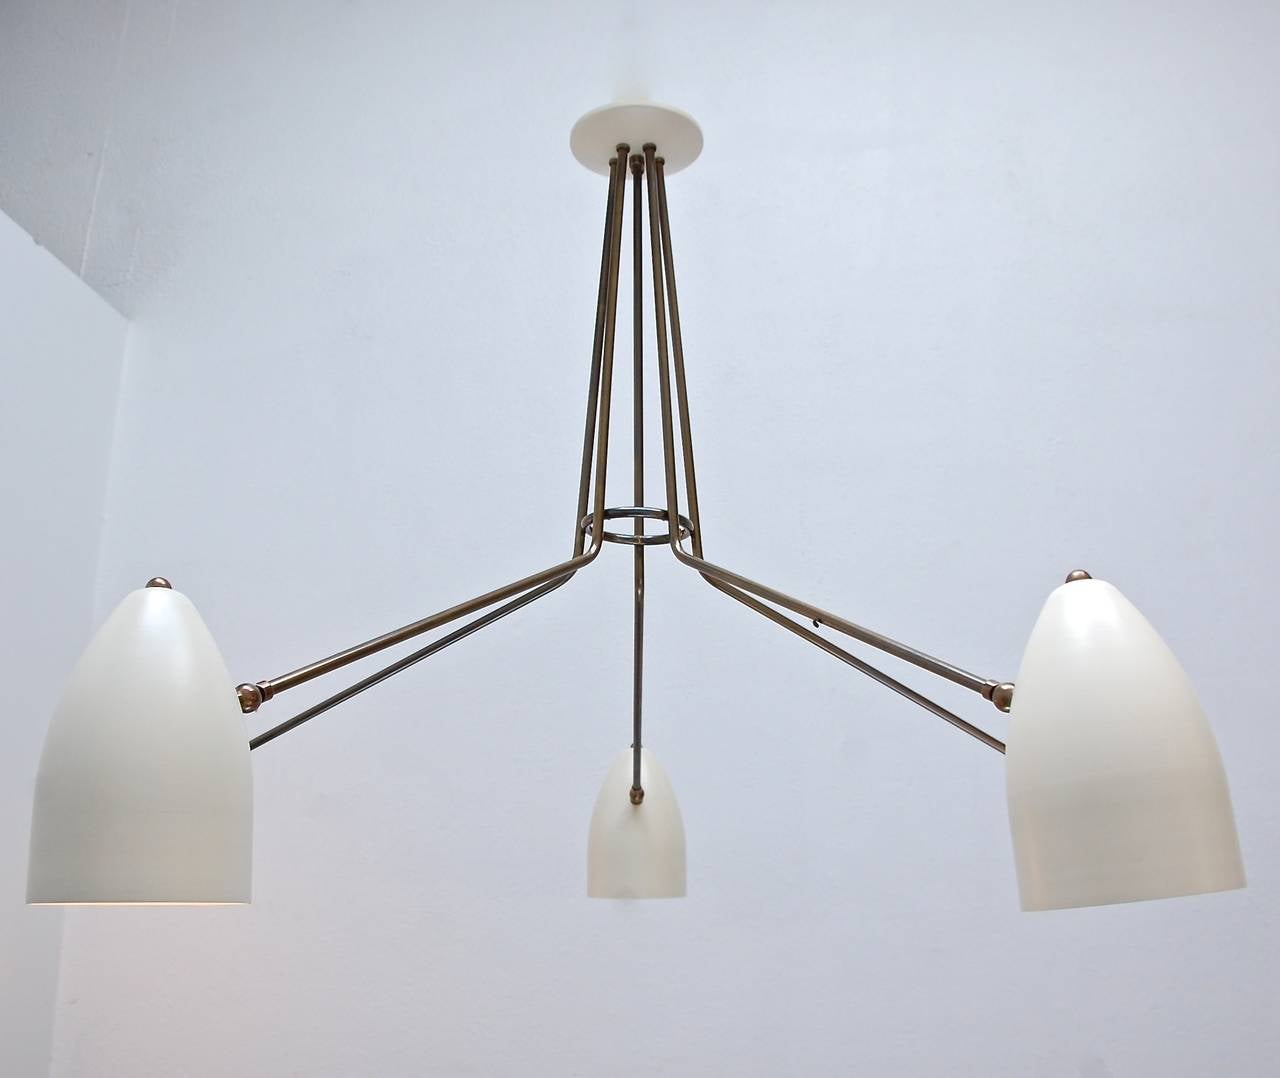 Beautiful Minimalist five-arm flush mount chandelier with five cone shades that pivot up and down for varied lighting. Light brass patina finish and painted aluminum.
E26 based socket per shade.